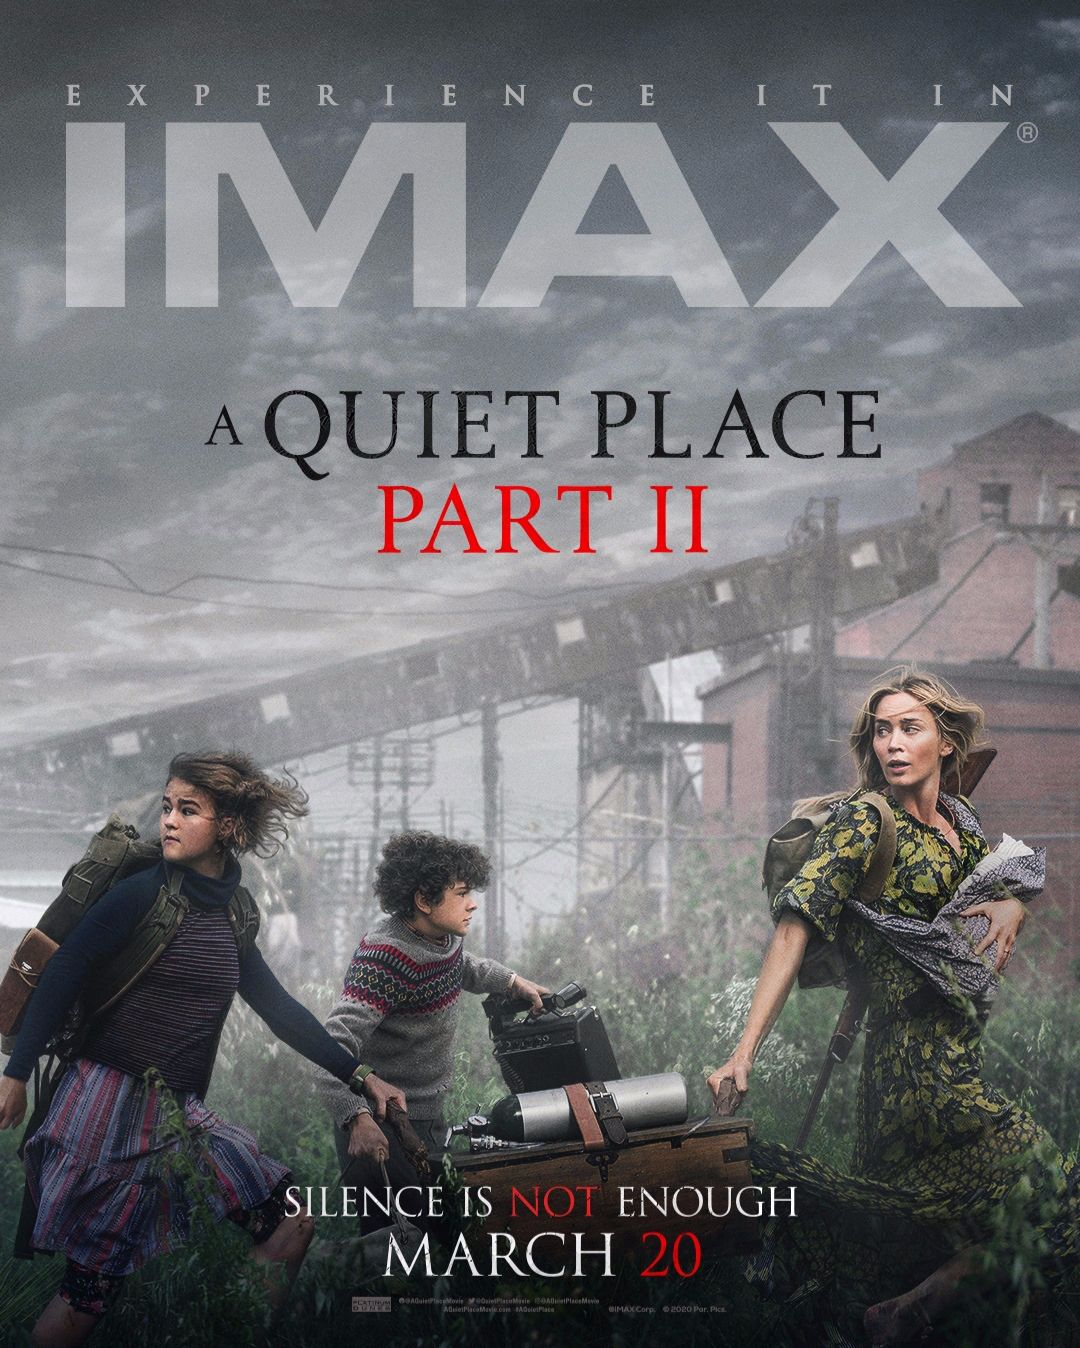 A Quiet Place Part II IMAX Poster